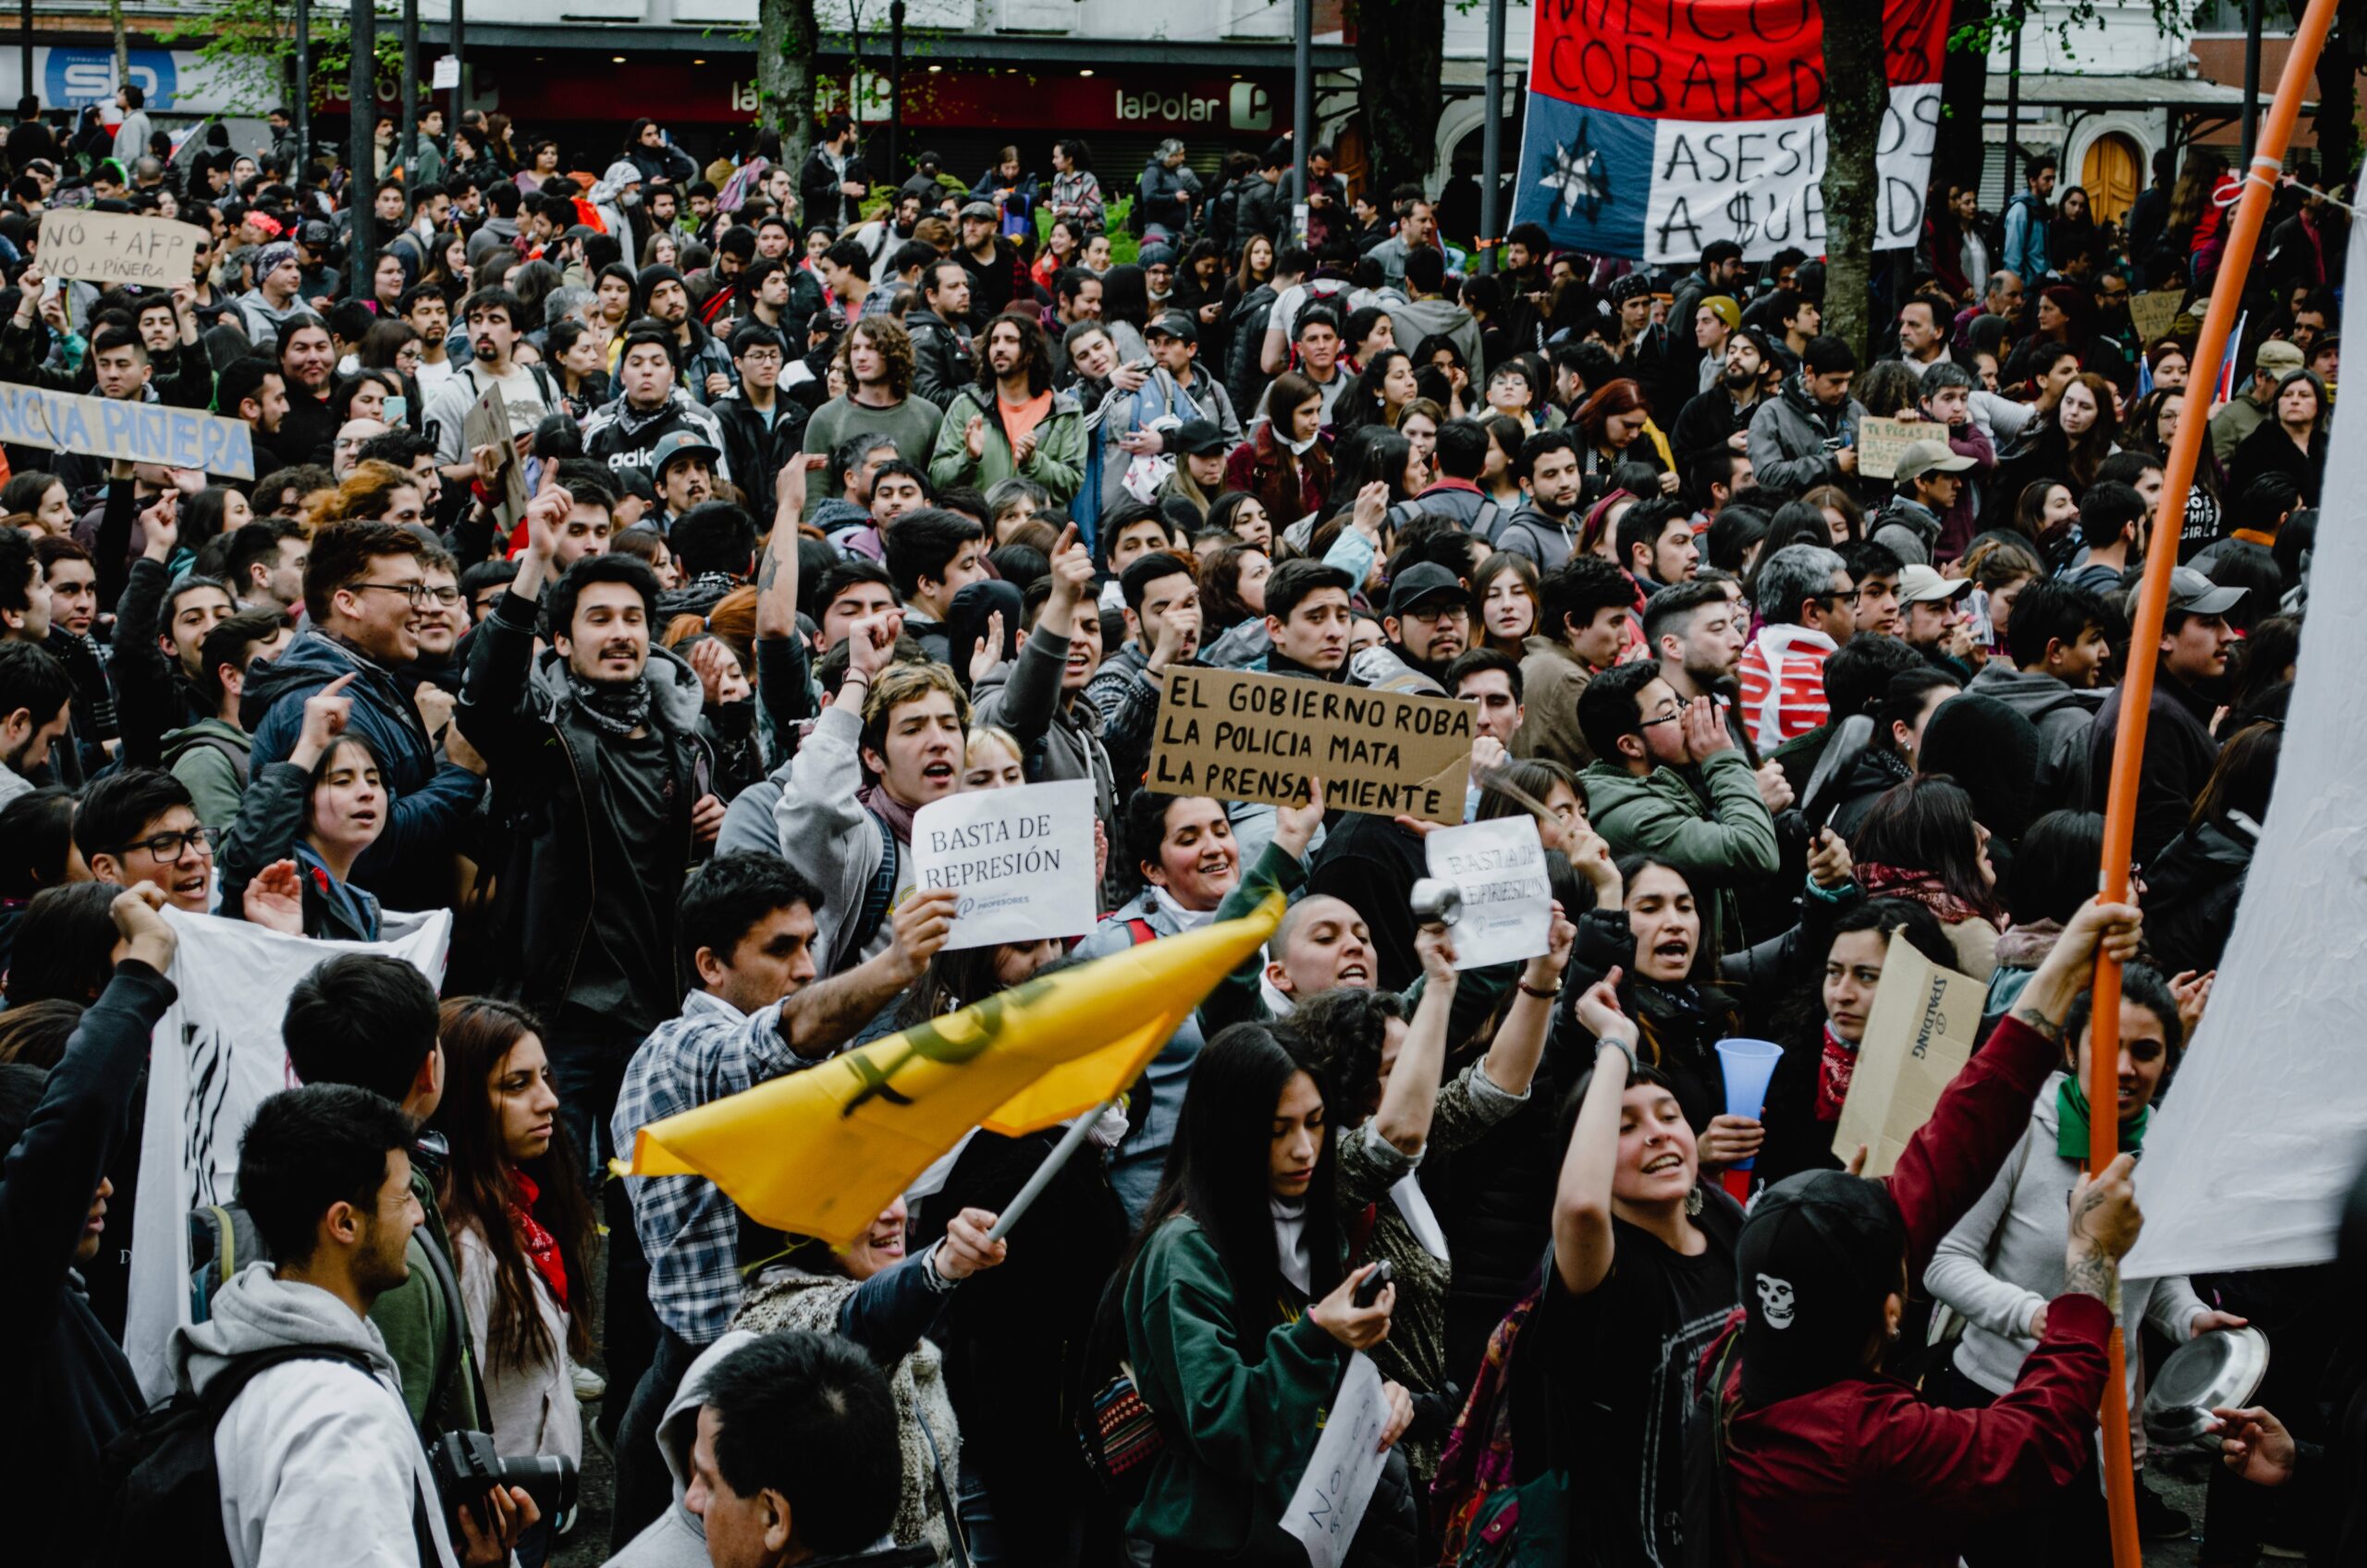 Protests for dignity and a better quality of life, Chile, 2019.